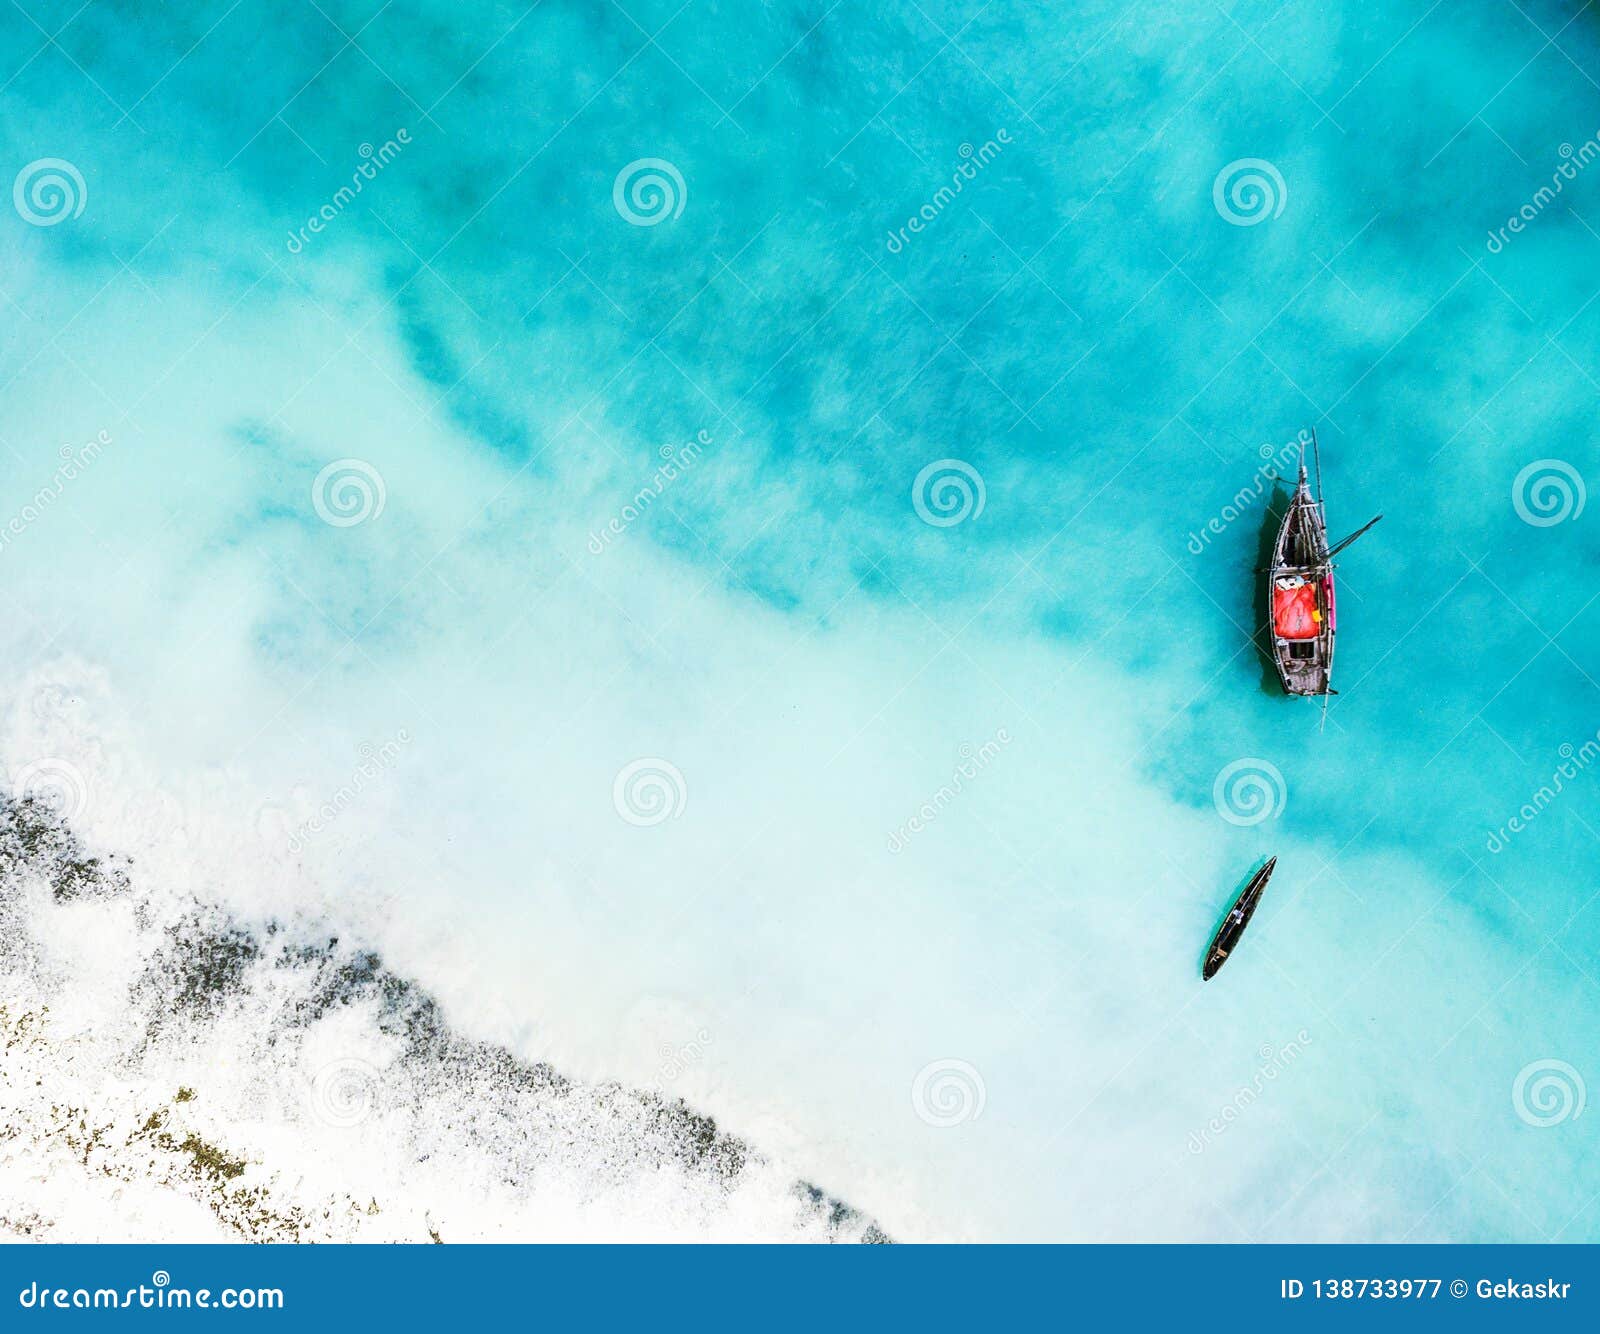 Boat and Ship in Beautiful Turquoise Ocean, Top View Stock Image